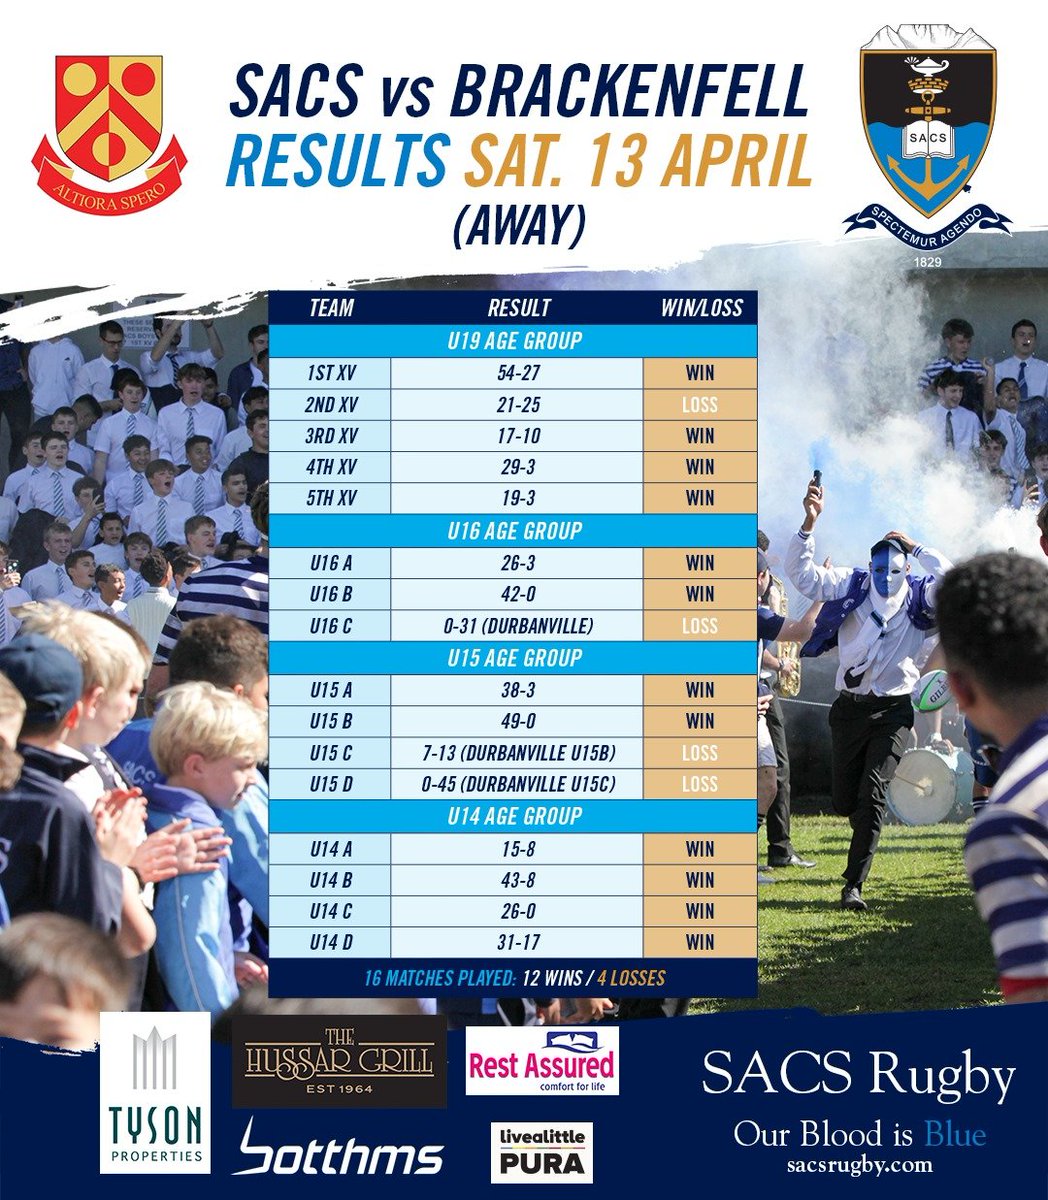 SACS Rugby (@sacsrugby) on Twitter photo 2024-04-15 09:18:35